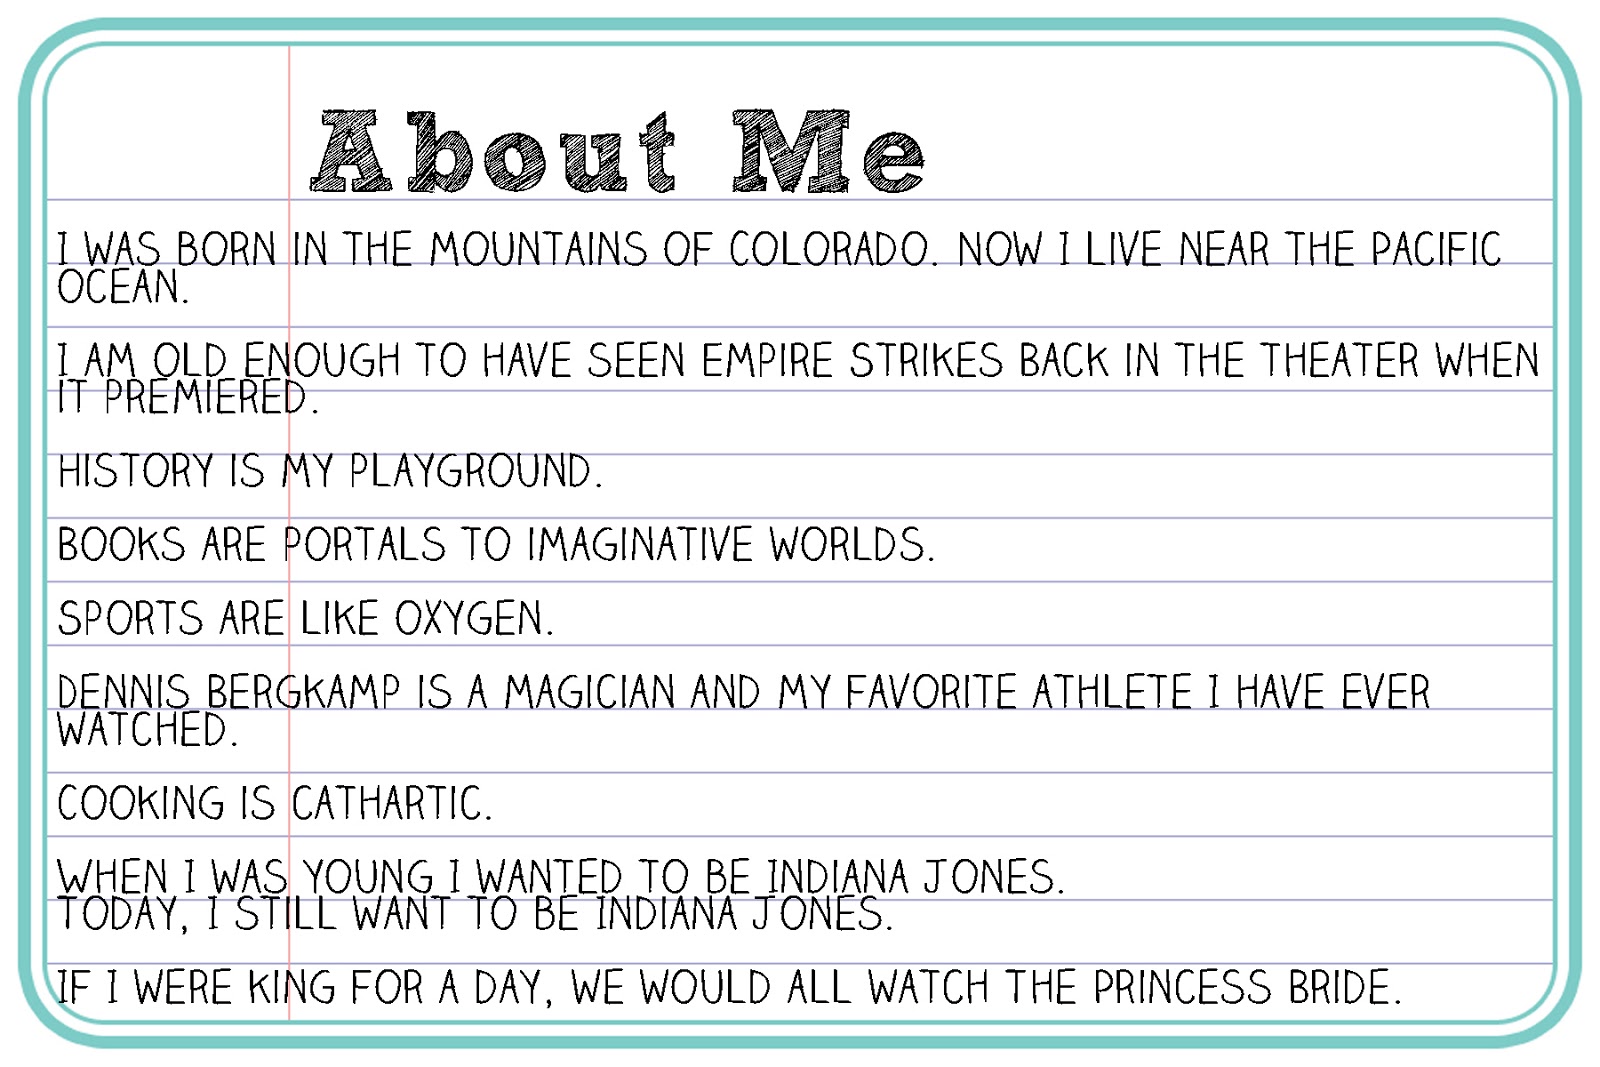 7 Steps for Writing Your Portfolio’s Biography ‘About Me’ Page